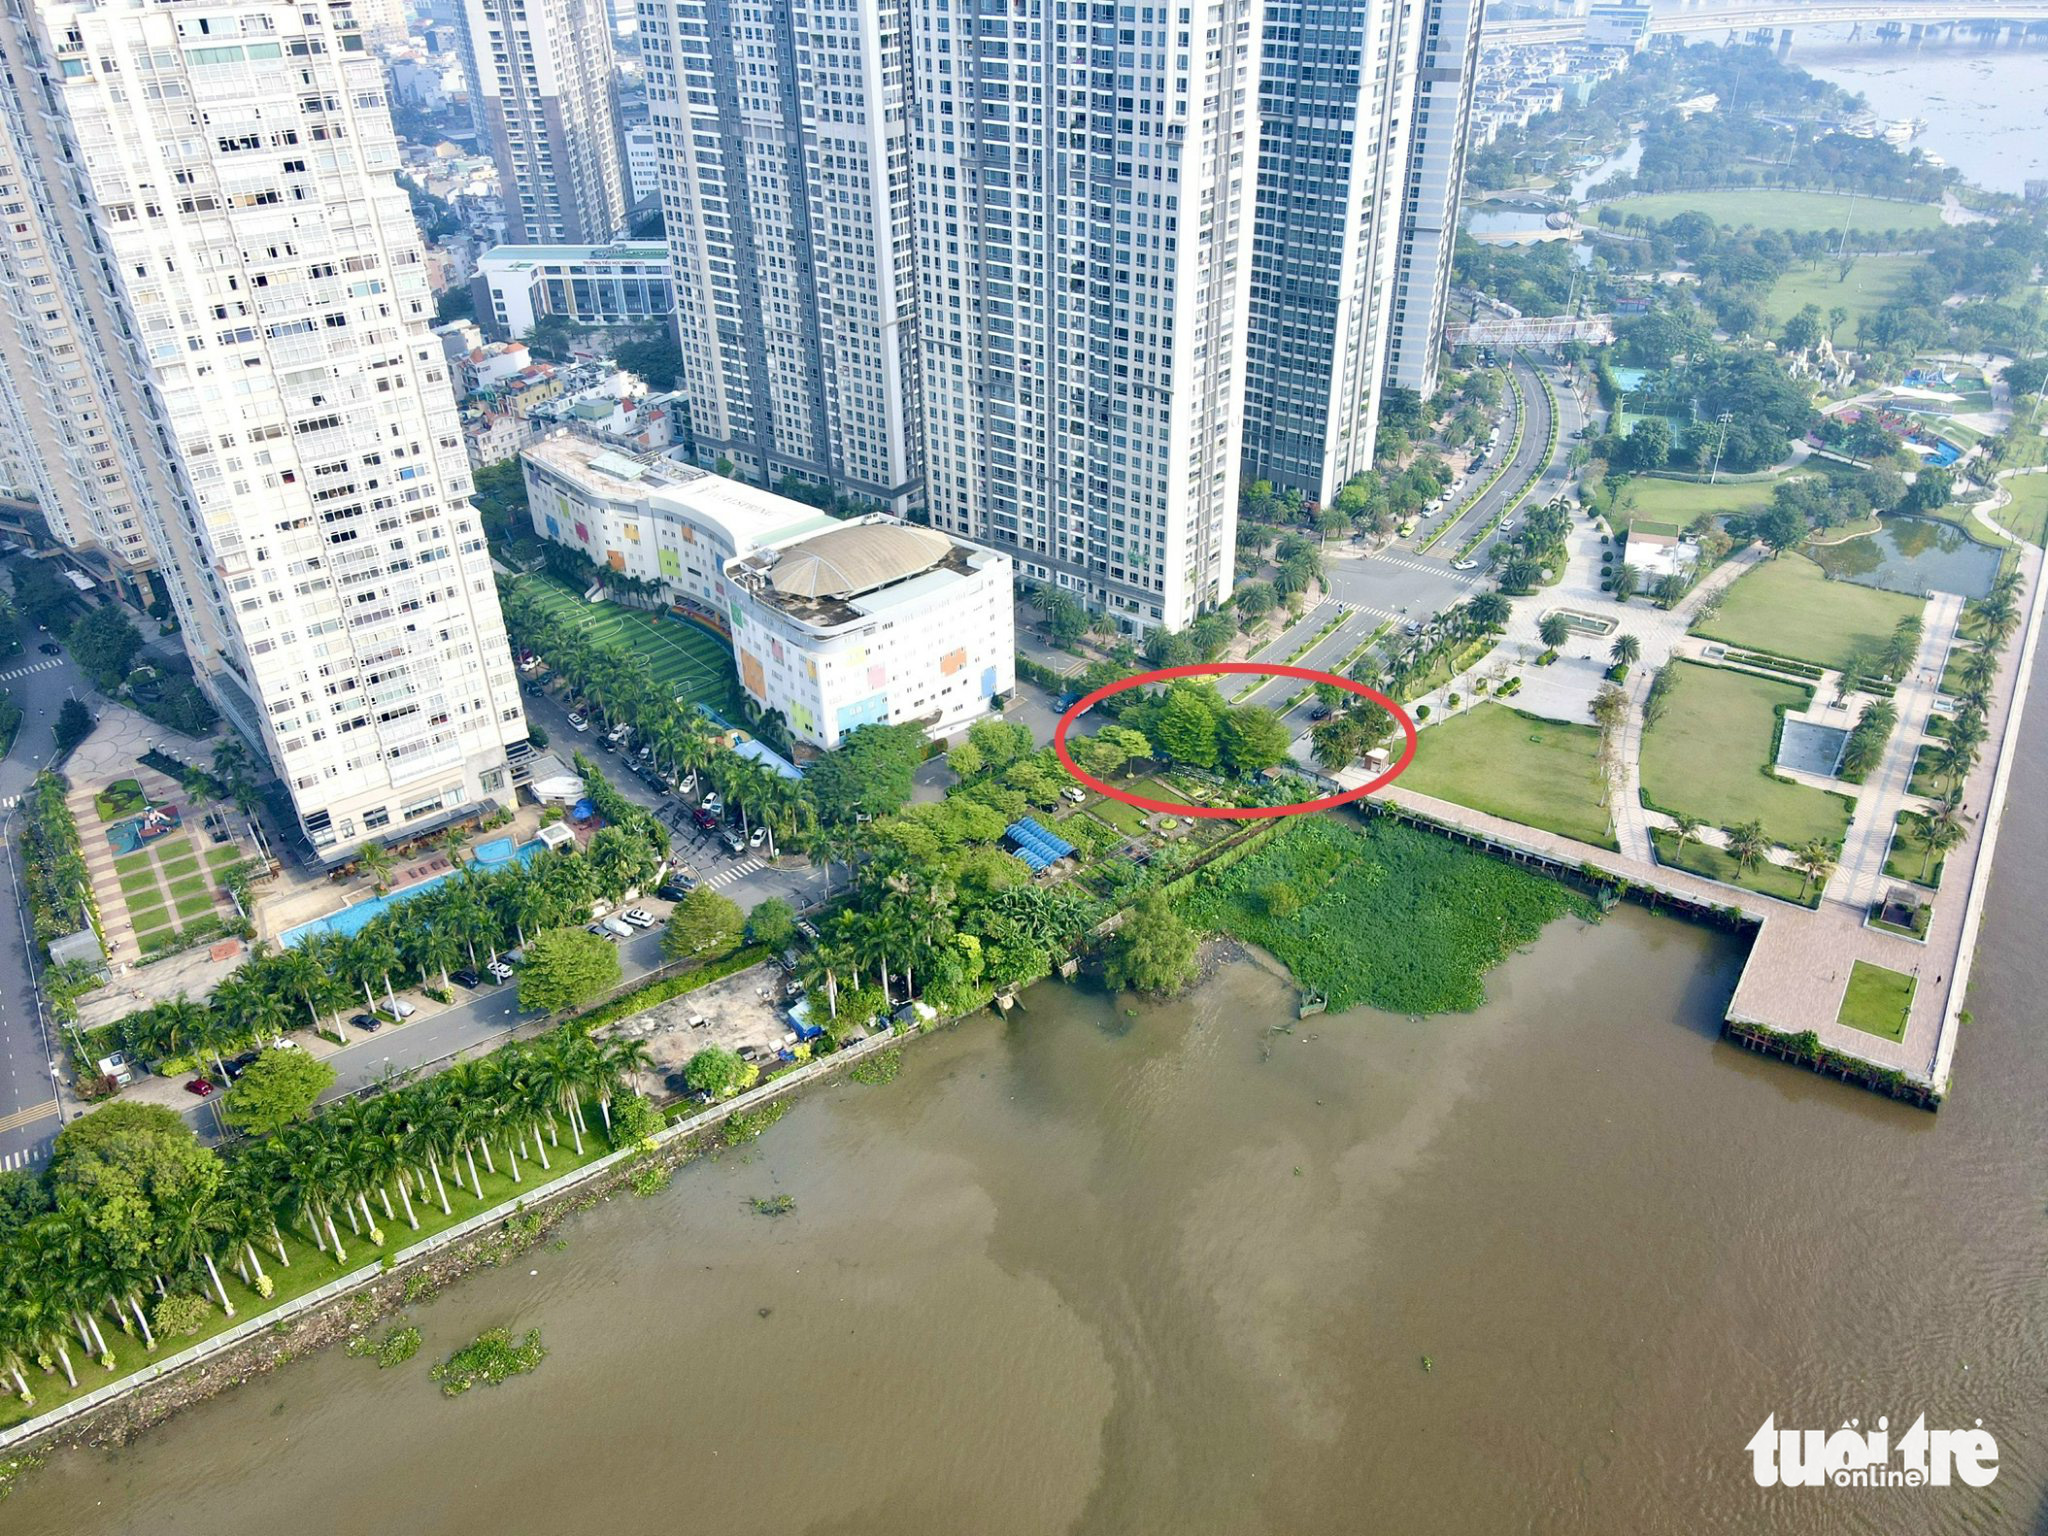 Ho Chi Minh City looks to connect private roads in two luxury condo complexes to reduce congestion